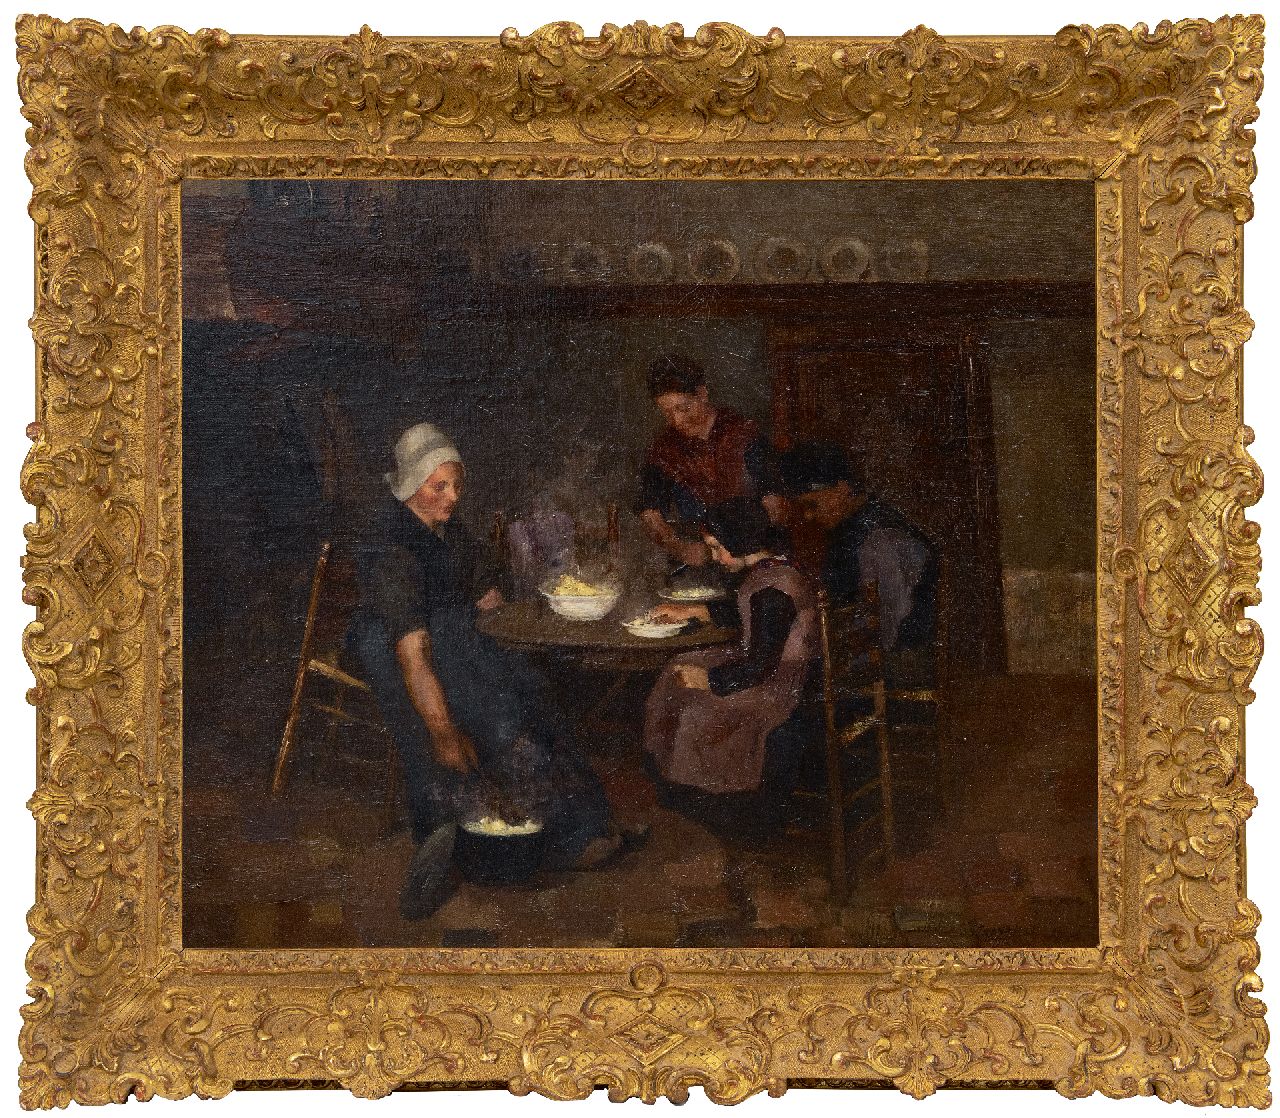 Frankfort E.  | Eduard Frankfort | Paintings offered for sale | Mealtime, oil on canvas 49.2 x 59.1 cm, signed l.r.